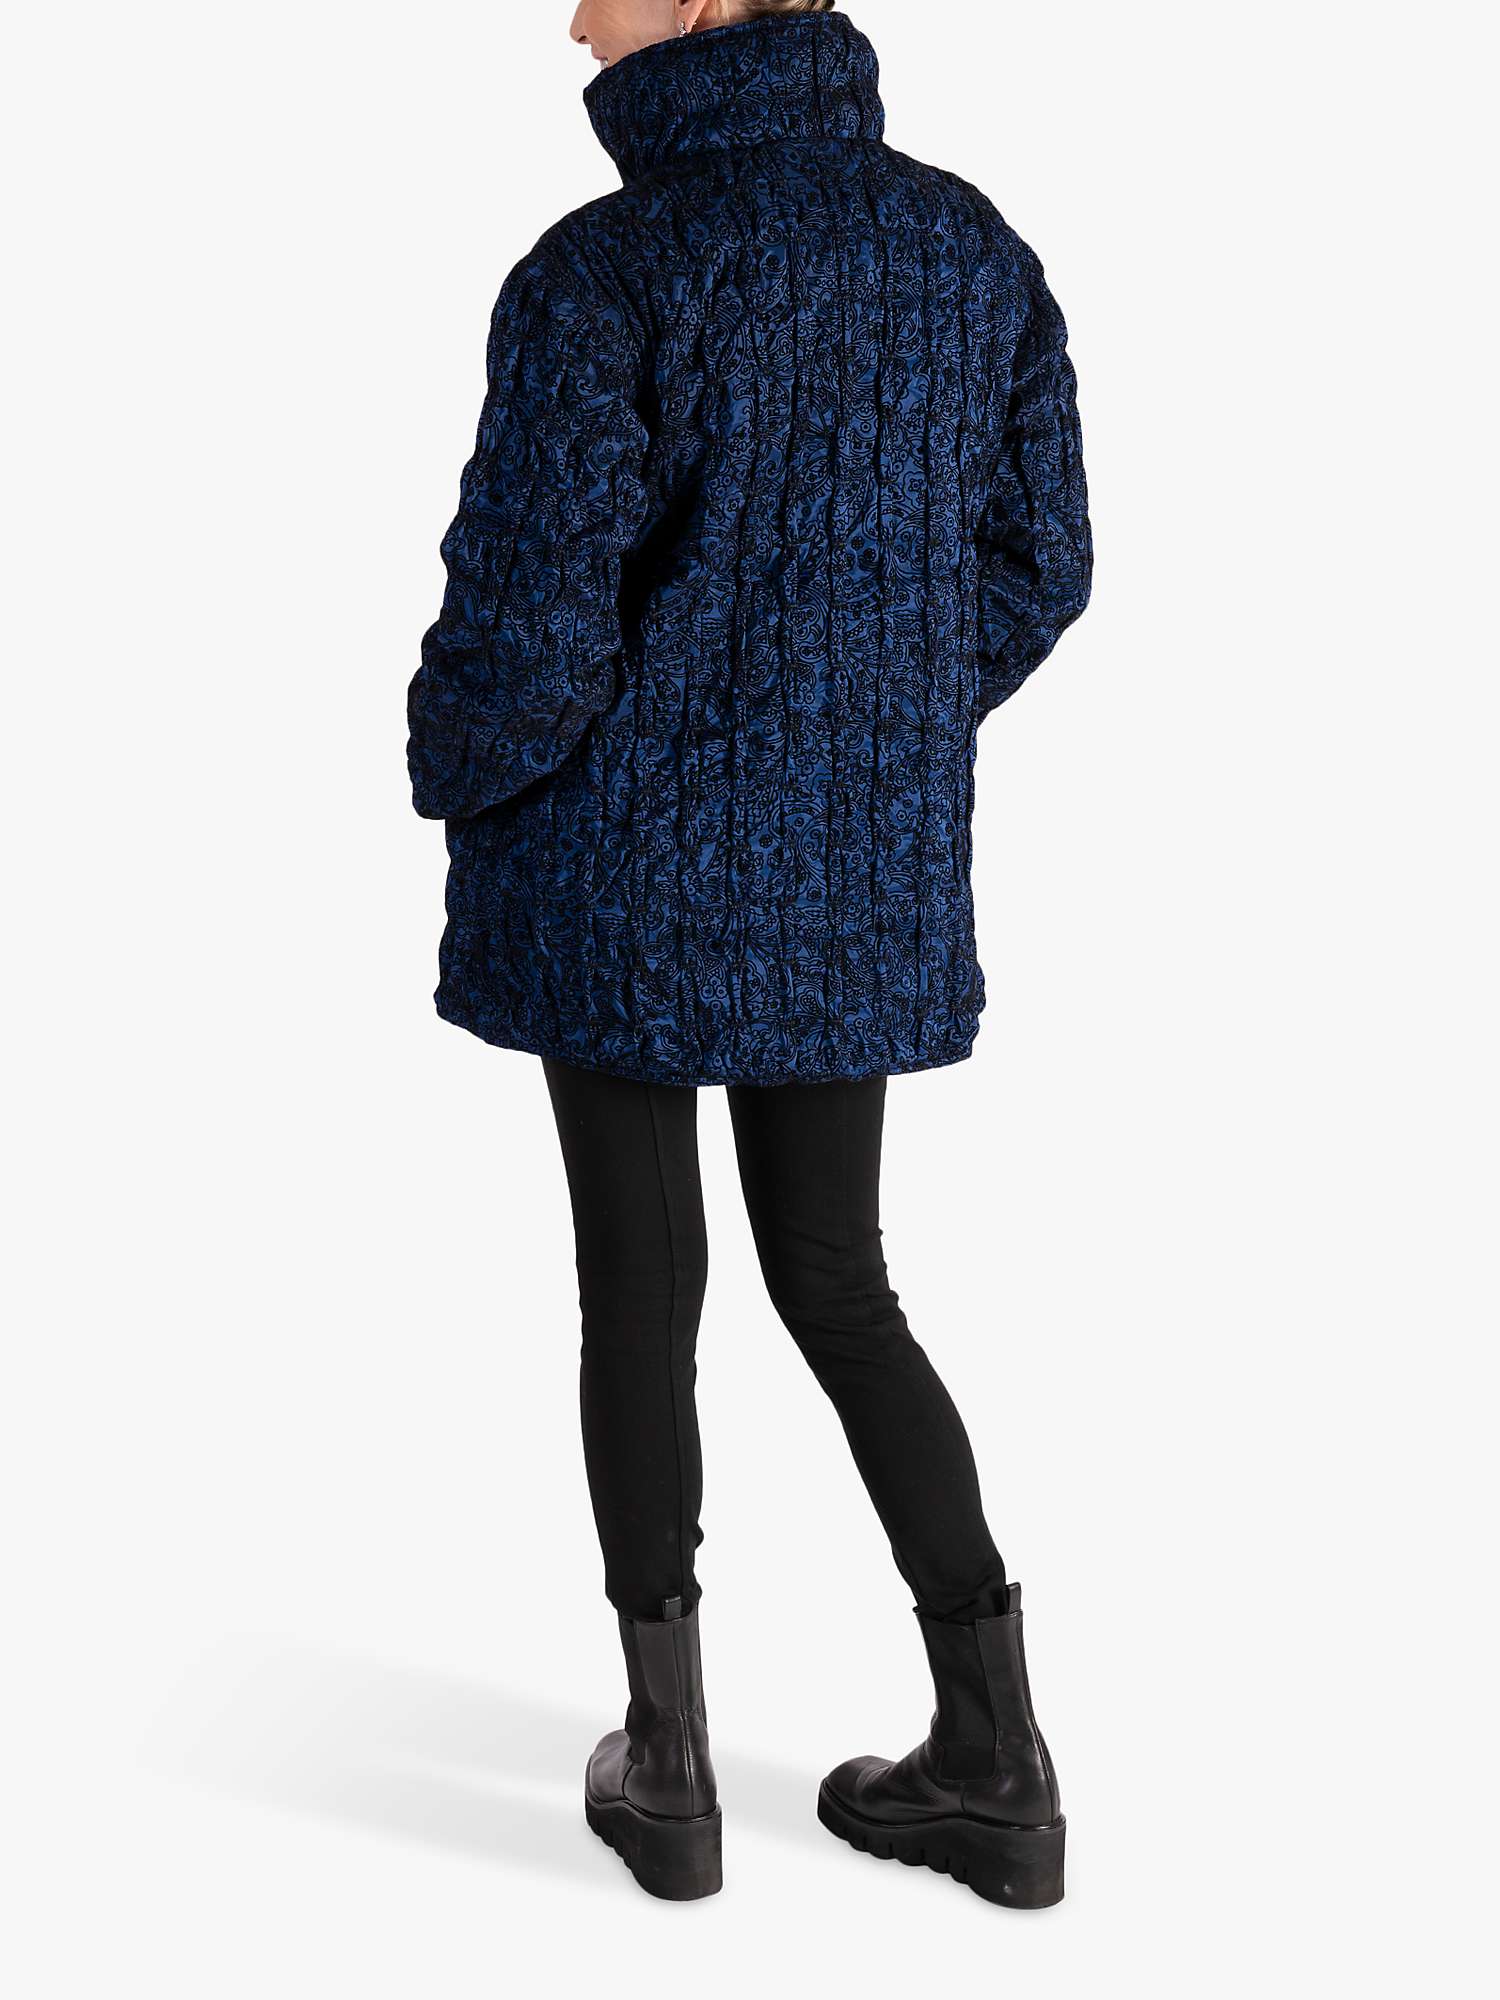 Buy chesca Paisley Flocked Quilted Reversible Coat, Navy/Black Online at johnlewis.com